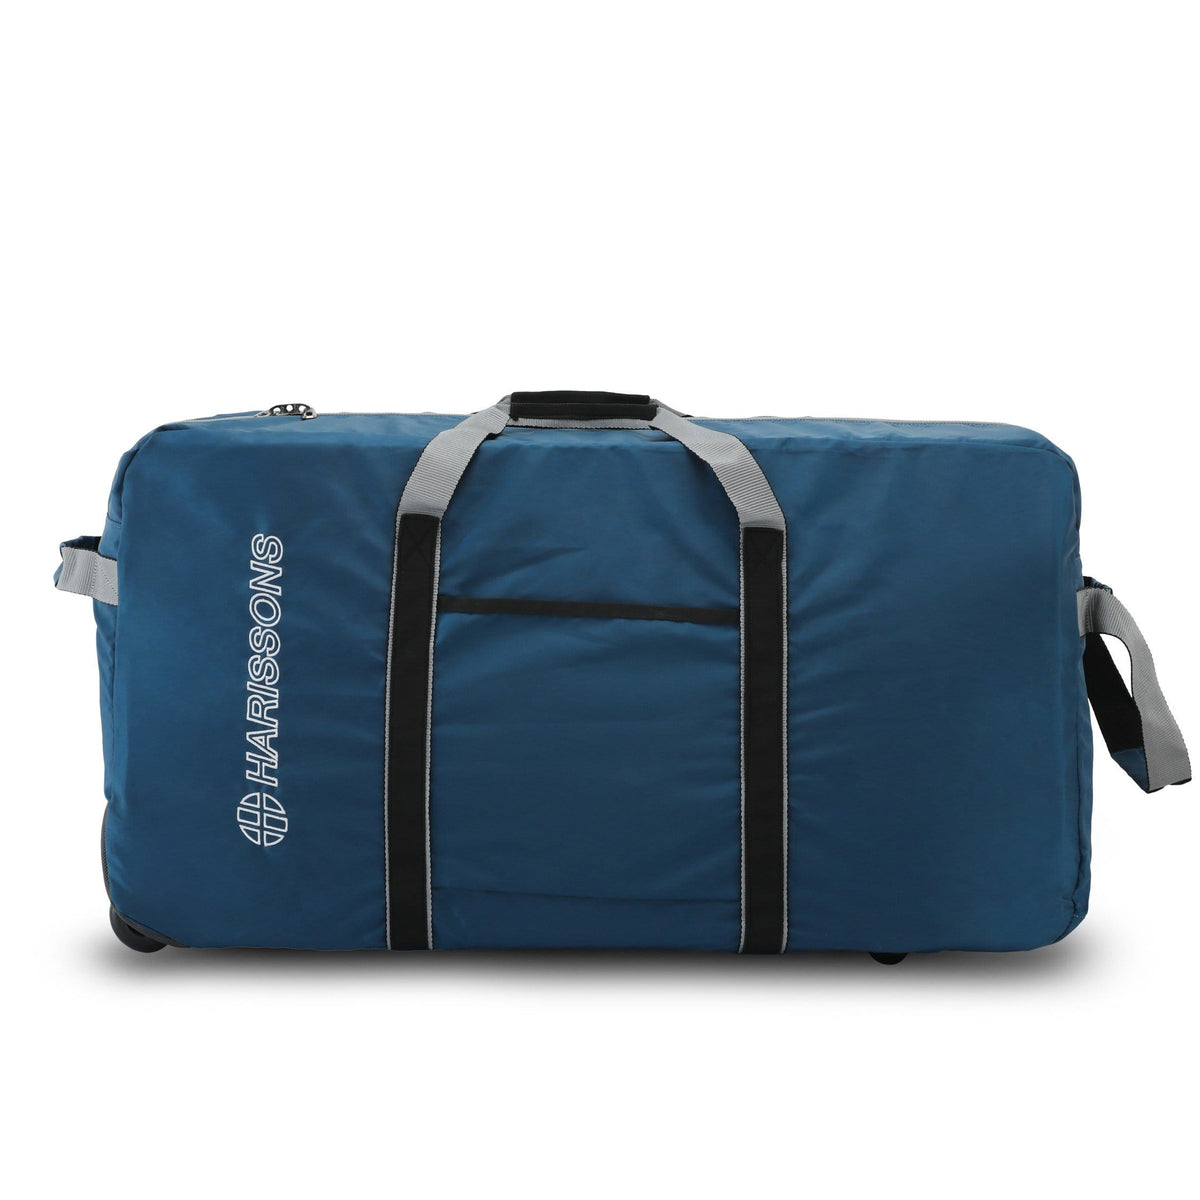 Duffel Bags - Explore Carry On & Rolling Duffle Bags | Travelpro